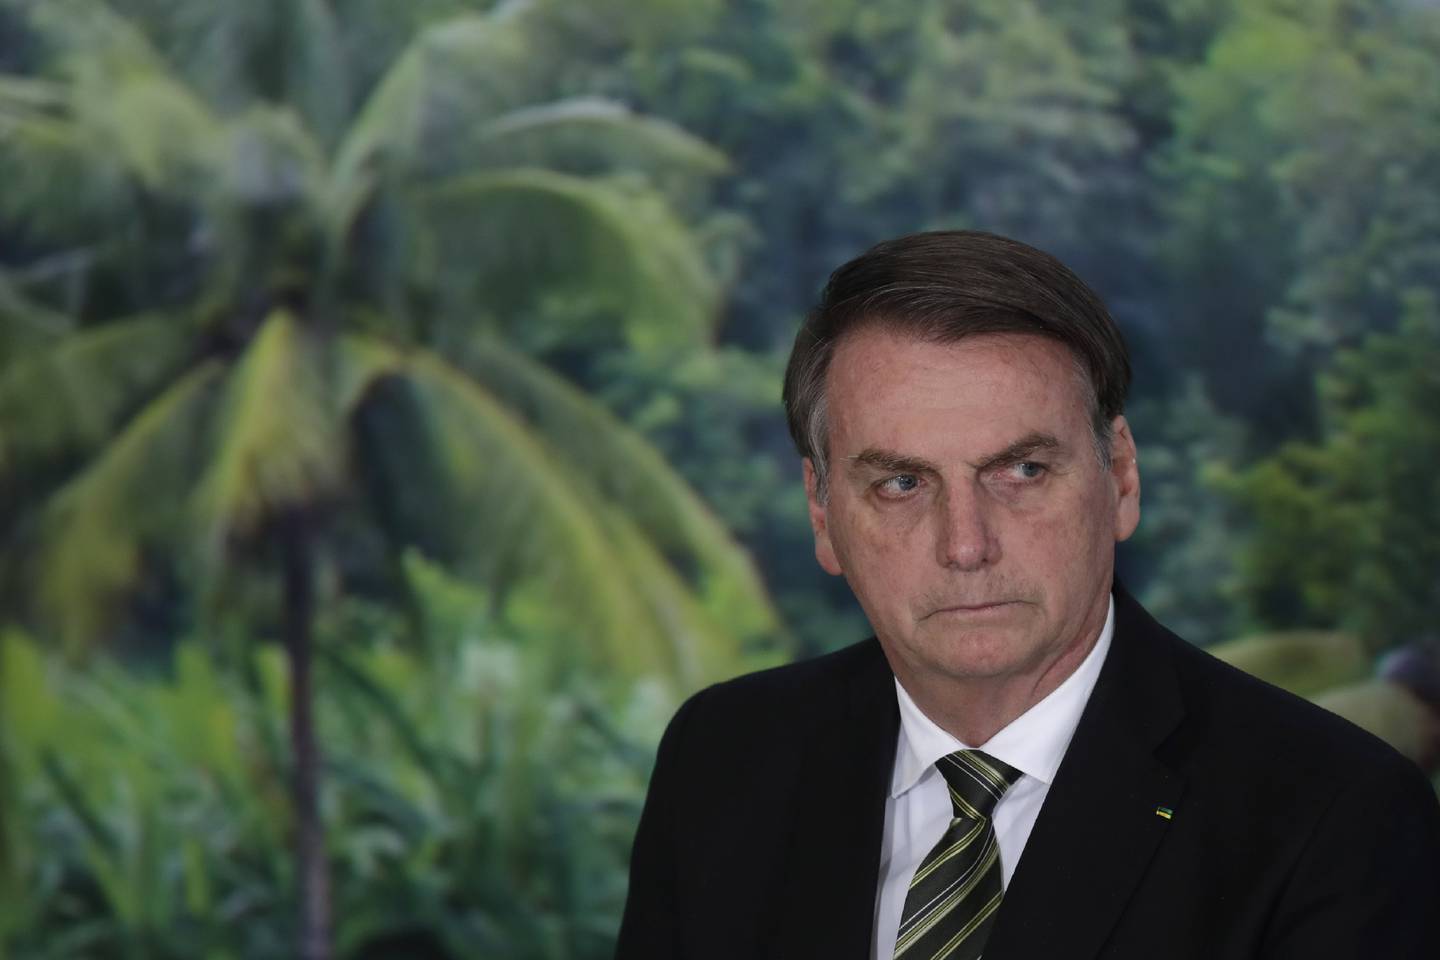 FILE - In this Oct. 1, 2019 file photo, President Jair Bolsonaro attends a ceremony to launch an agro program at the Planalto presidential palace in Brasilia, Brazil. Alter do Chao, a sleepy Amazon town, has become the flashpoint for the growing hostility between Bolsonaro and environmental groups following the arrest of firefighters he says set rainforest fires. (AP Photo/Eraldo Peres, File)